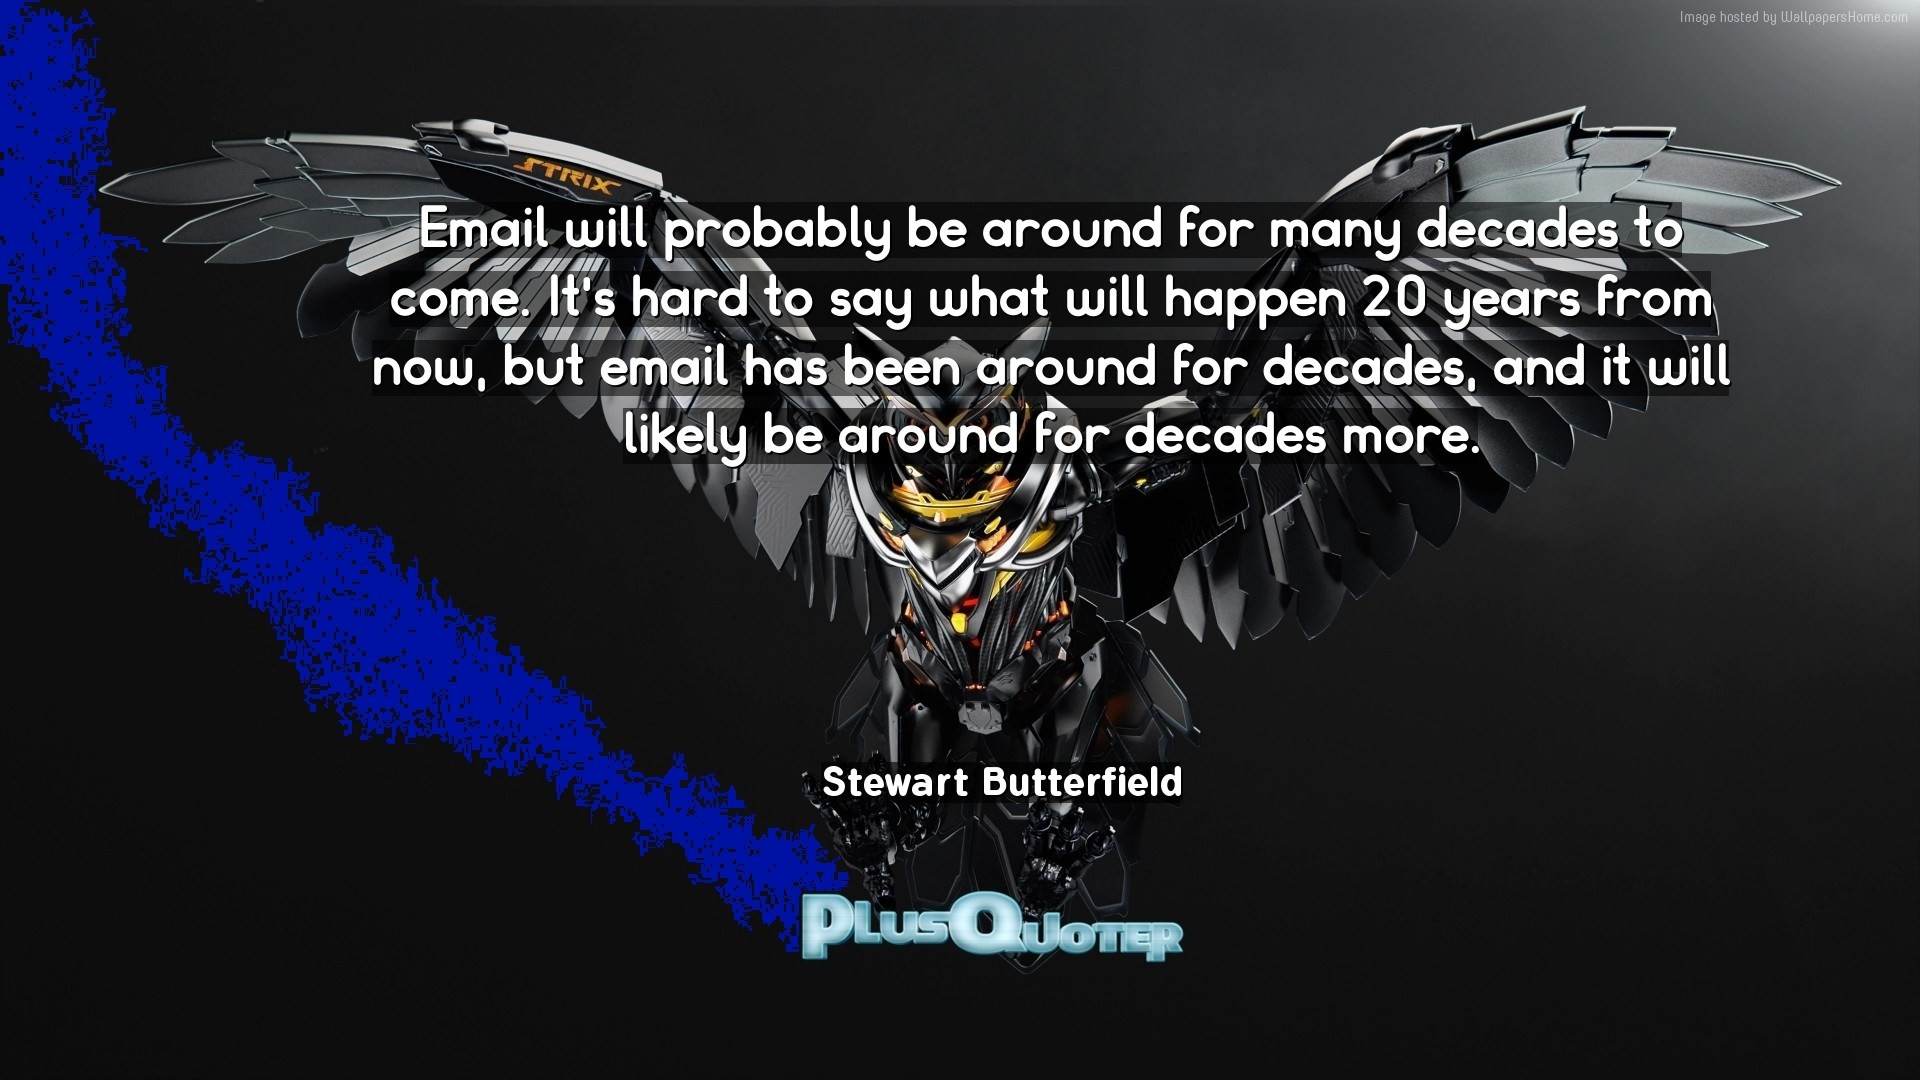 1920x1080 Download Wallpaper with inspirational Quotes- "Email will probably be  around for many decades to